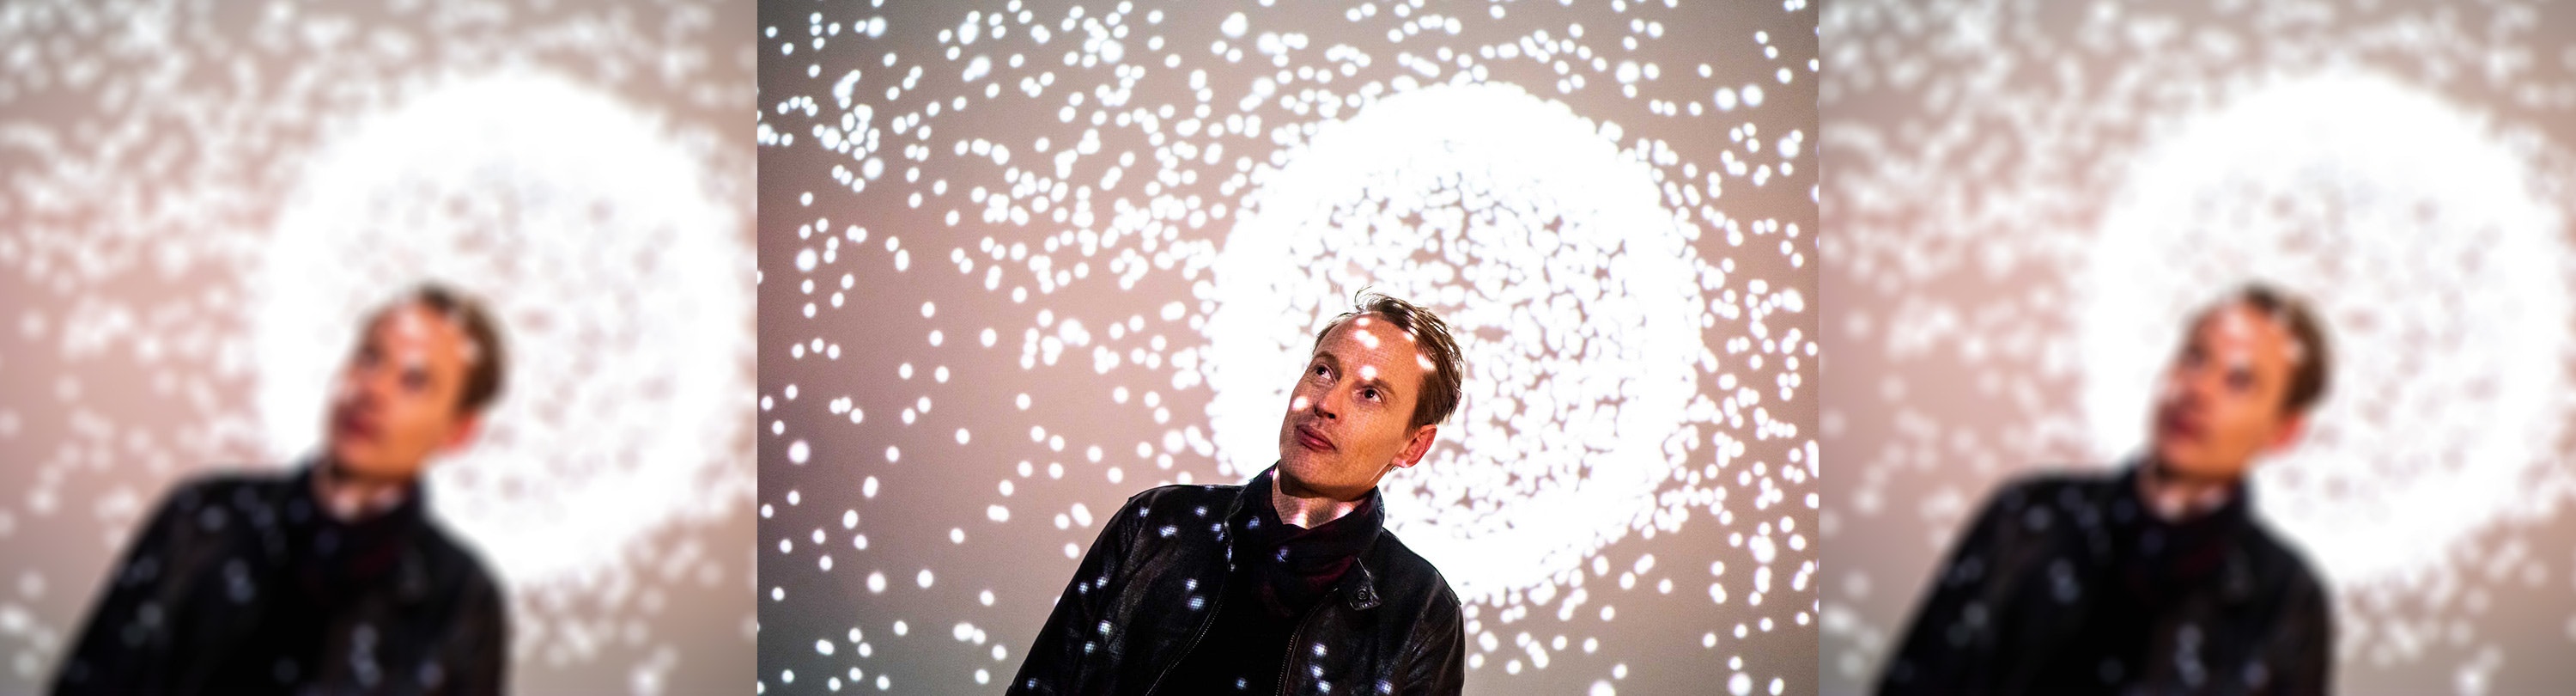 Artist Daan Roosegaarde is standing in front of a projection of a spark of sparkling lights and is wearing a dark leather jacket